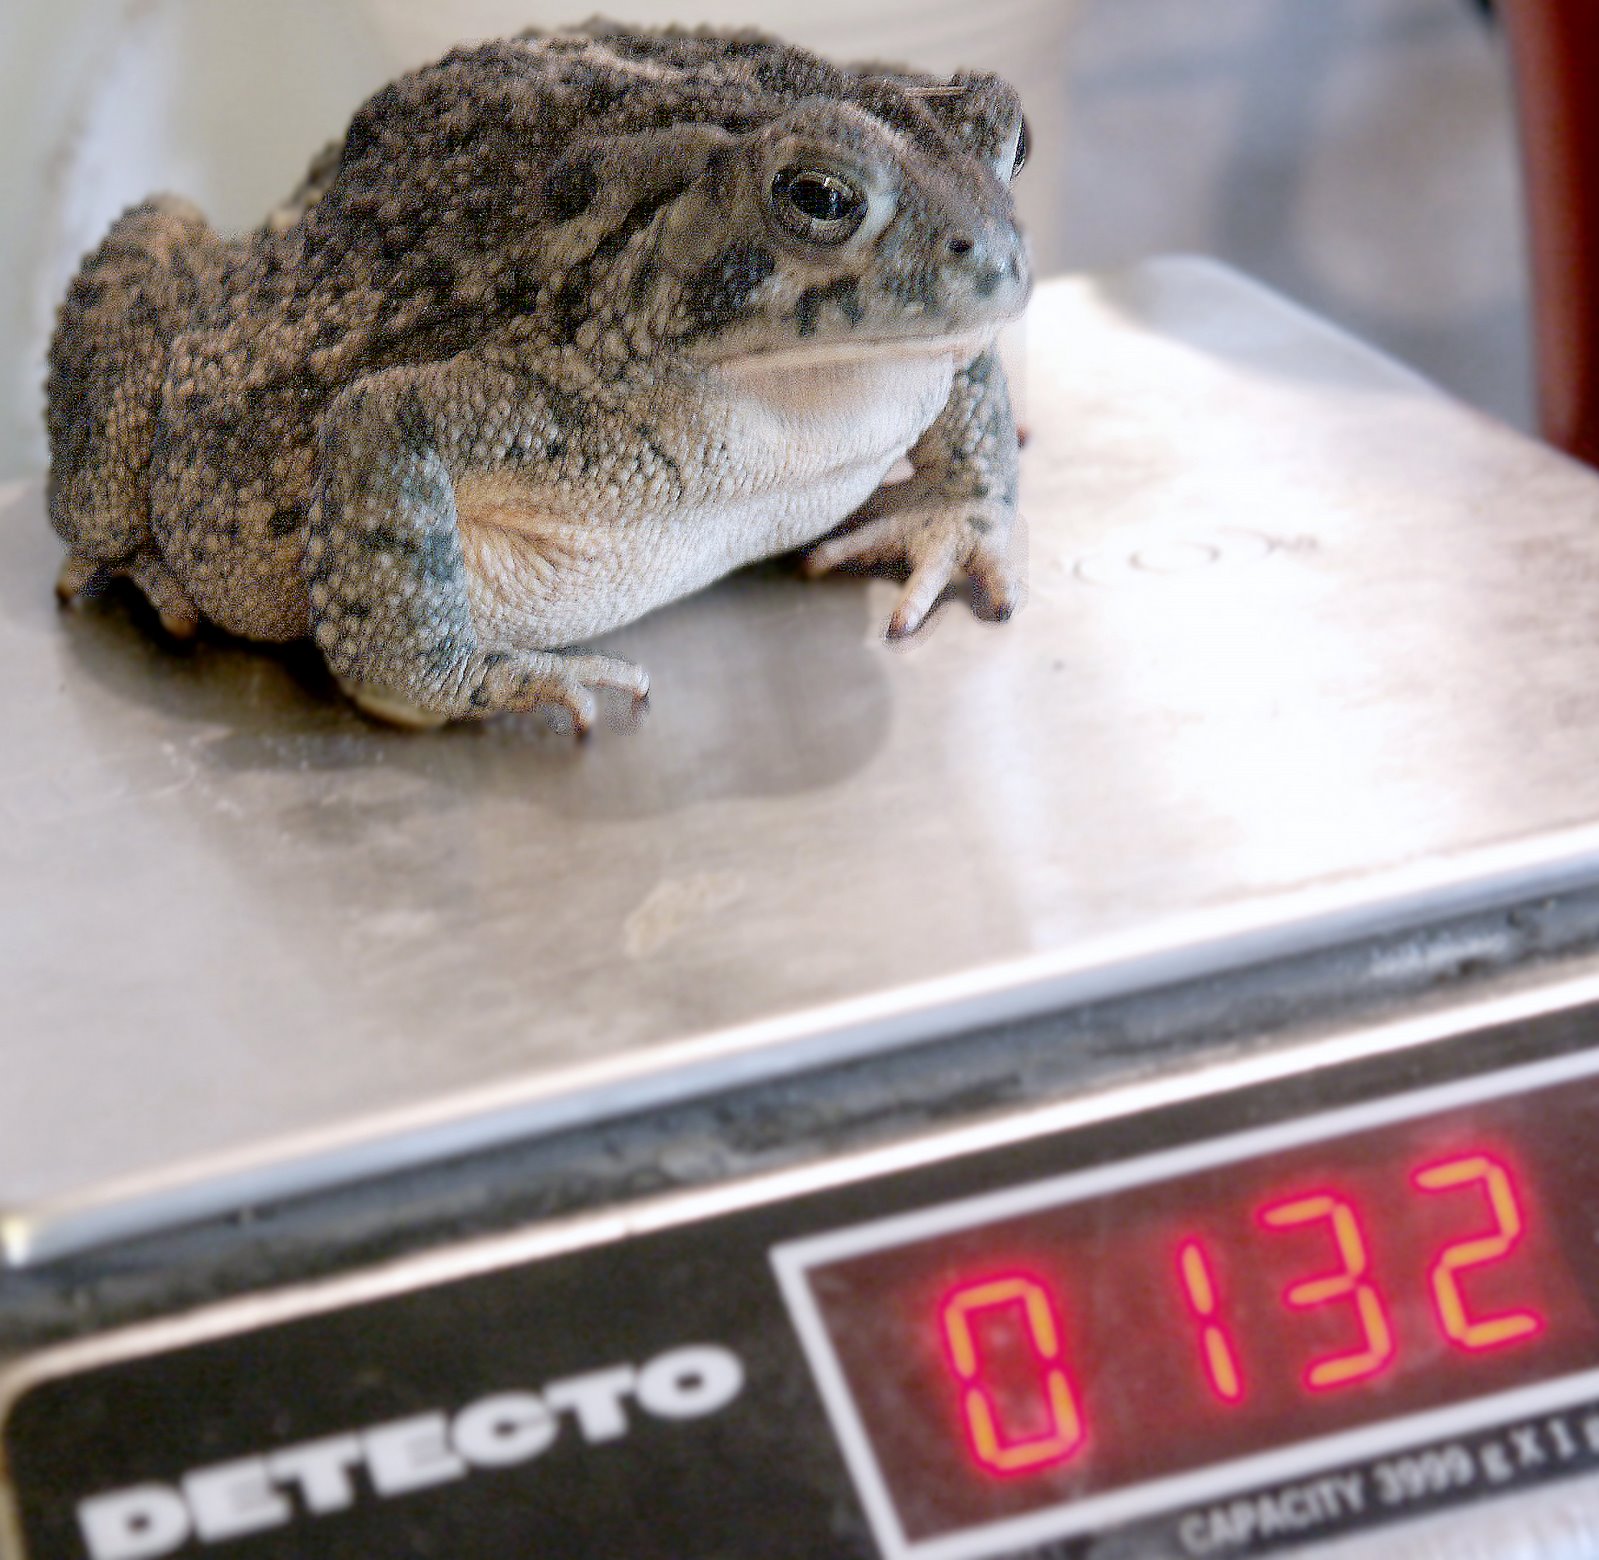 [Toad+on+scale.jpg]